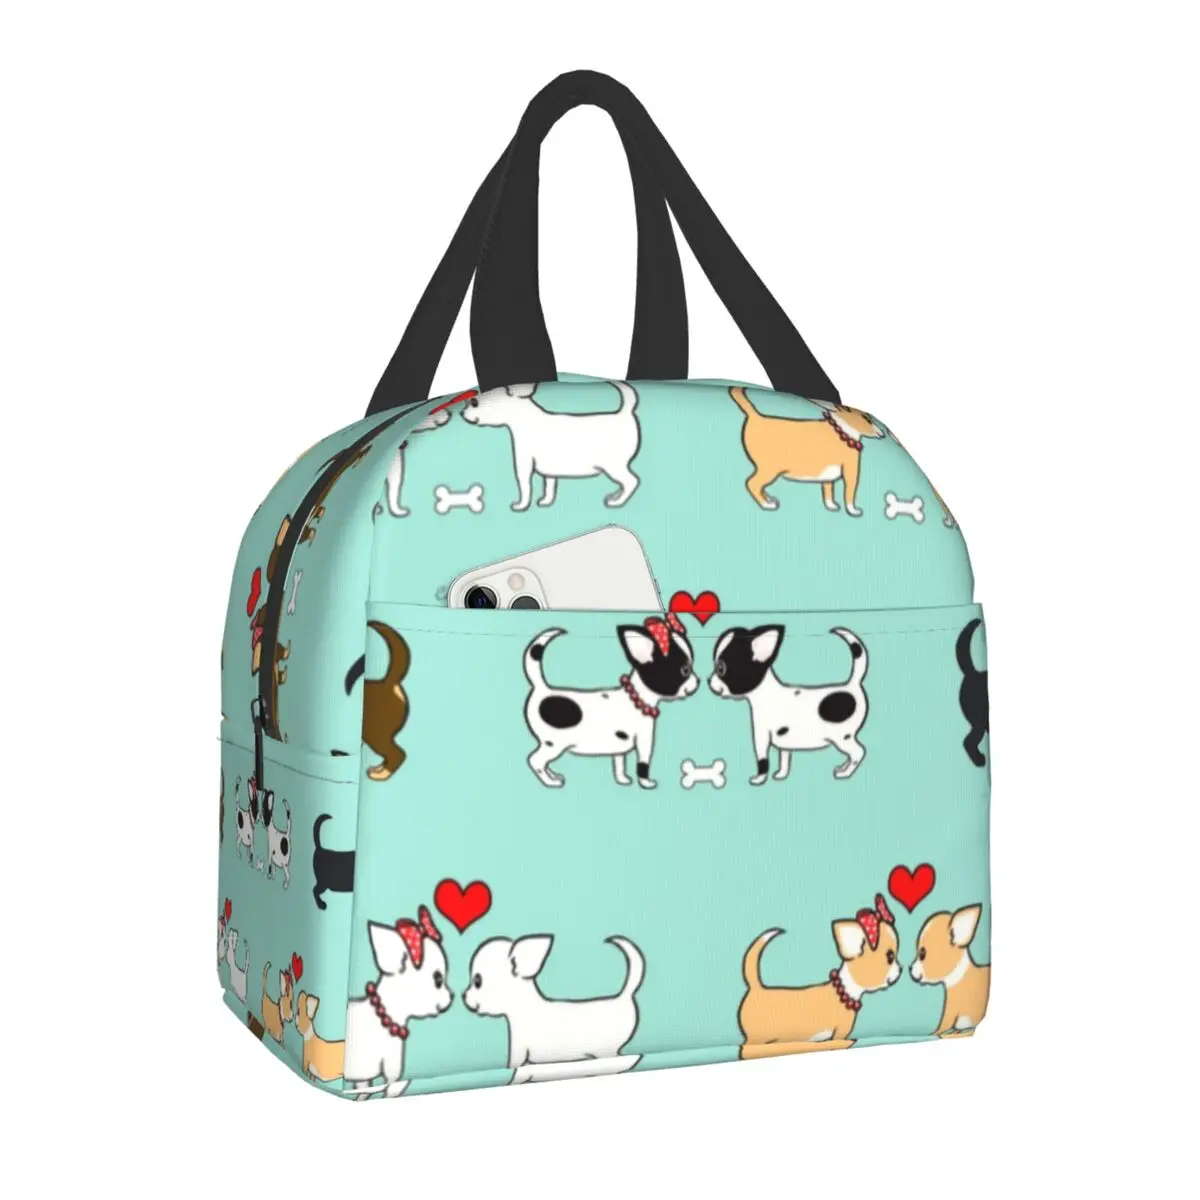 Chihuahuas Valentines Thermal Insulated Lunch Bags Women Cute Dog Puppy Portable Lunch Tote for Work School Travel Food Box